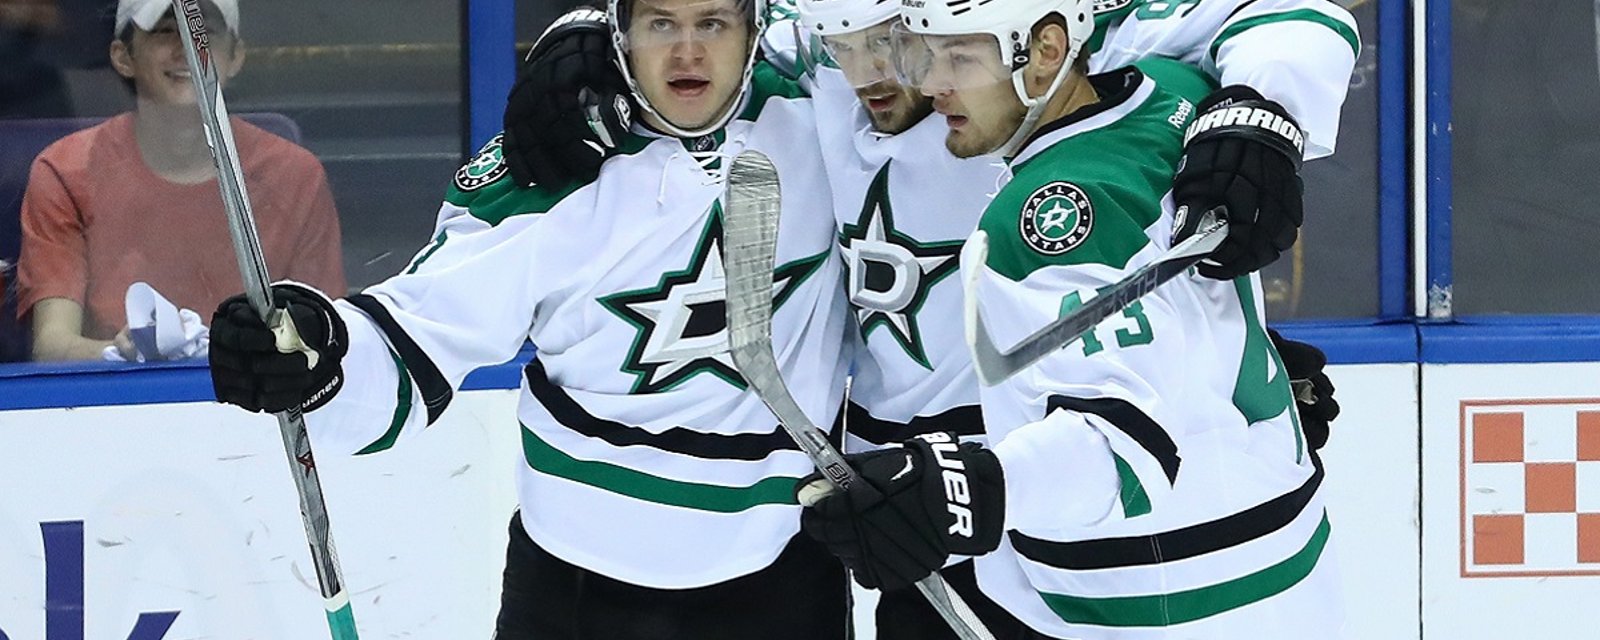 Report: Dallas Stars have lost another to player to what looks like a serious injury.